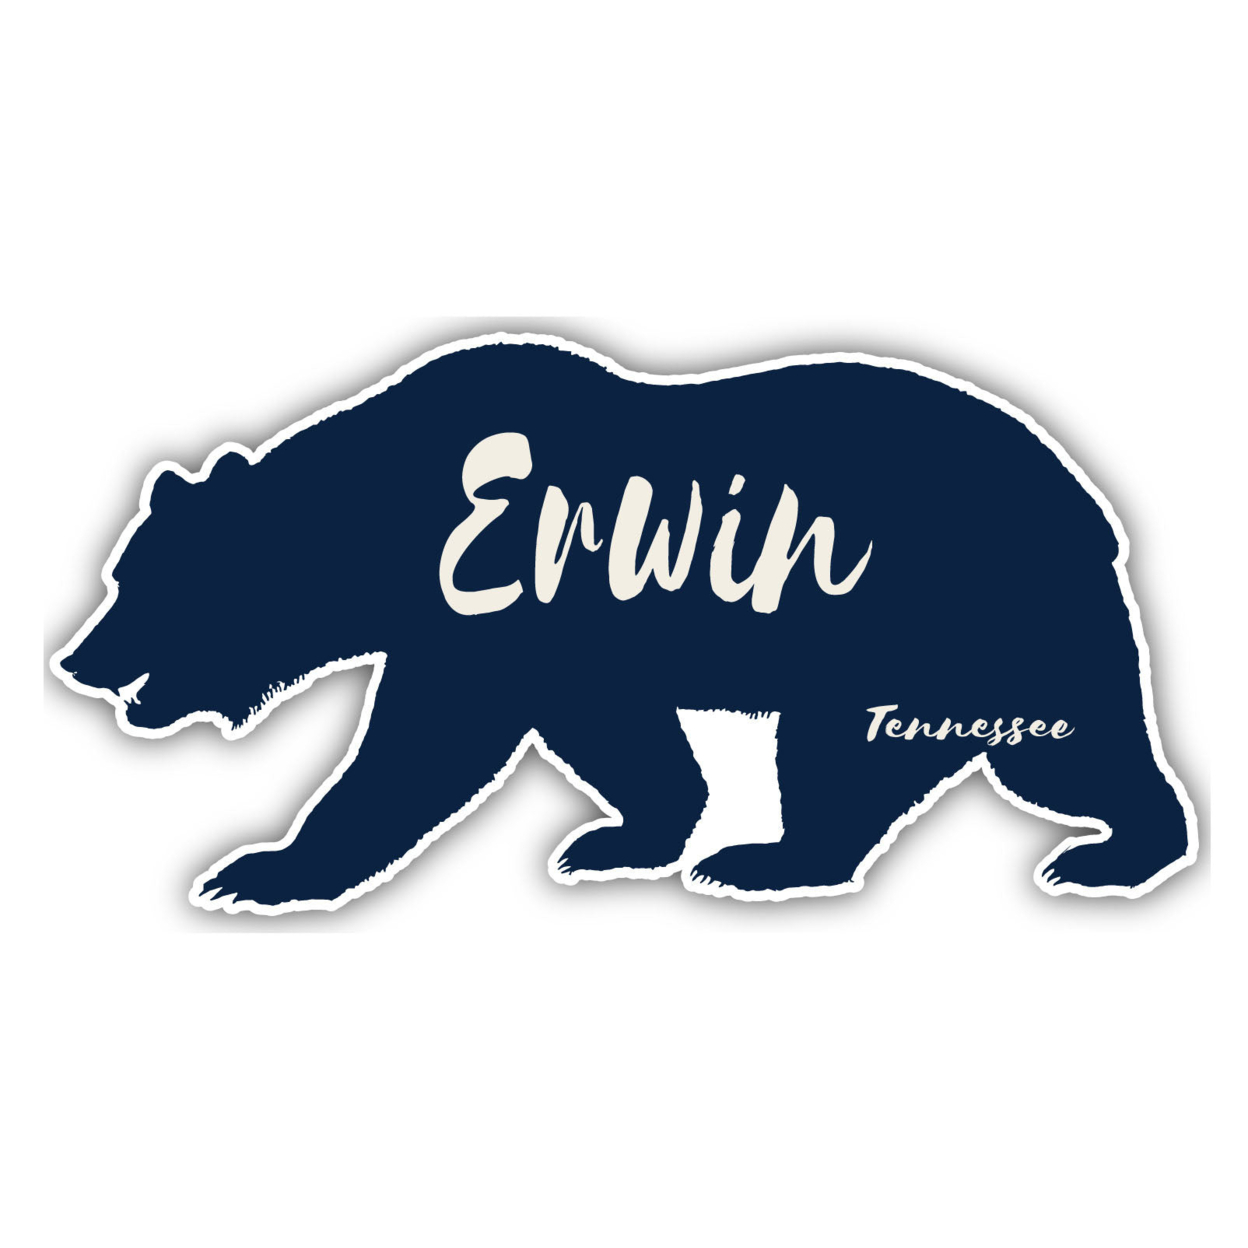 Erwin Tennessee Souvenir Decorative Stickers (Choose Theme And Size) - 4-Pack, 2-Inch, Bear